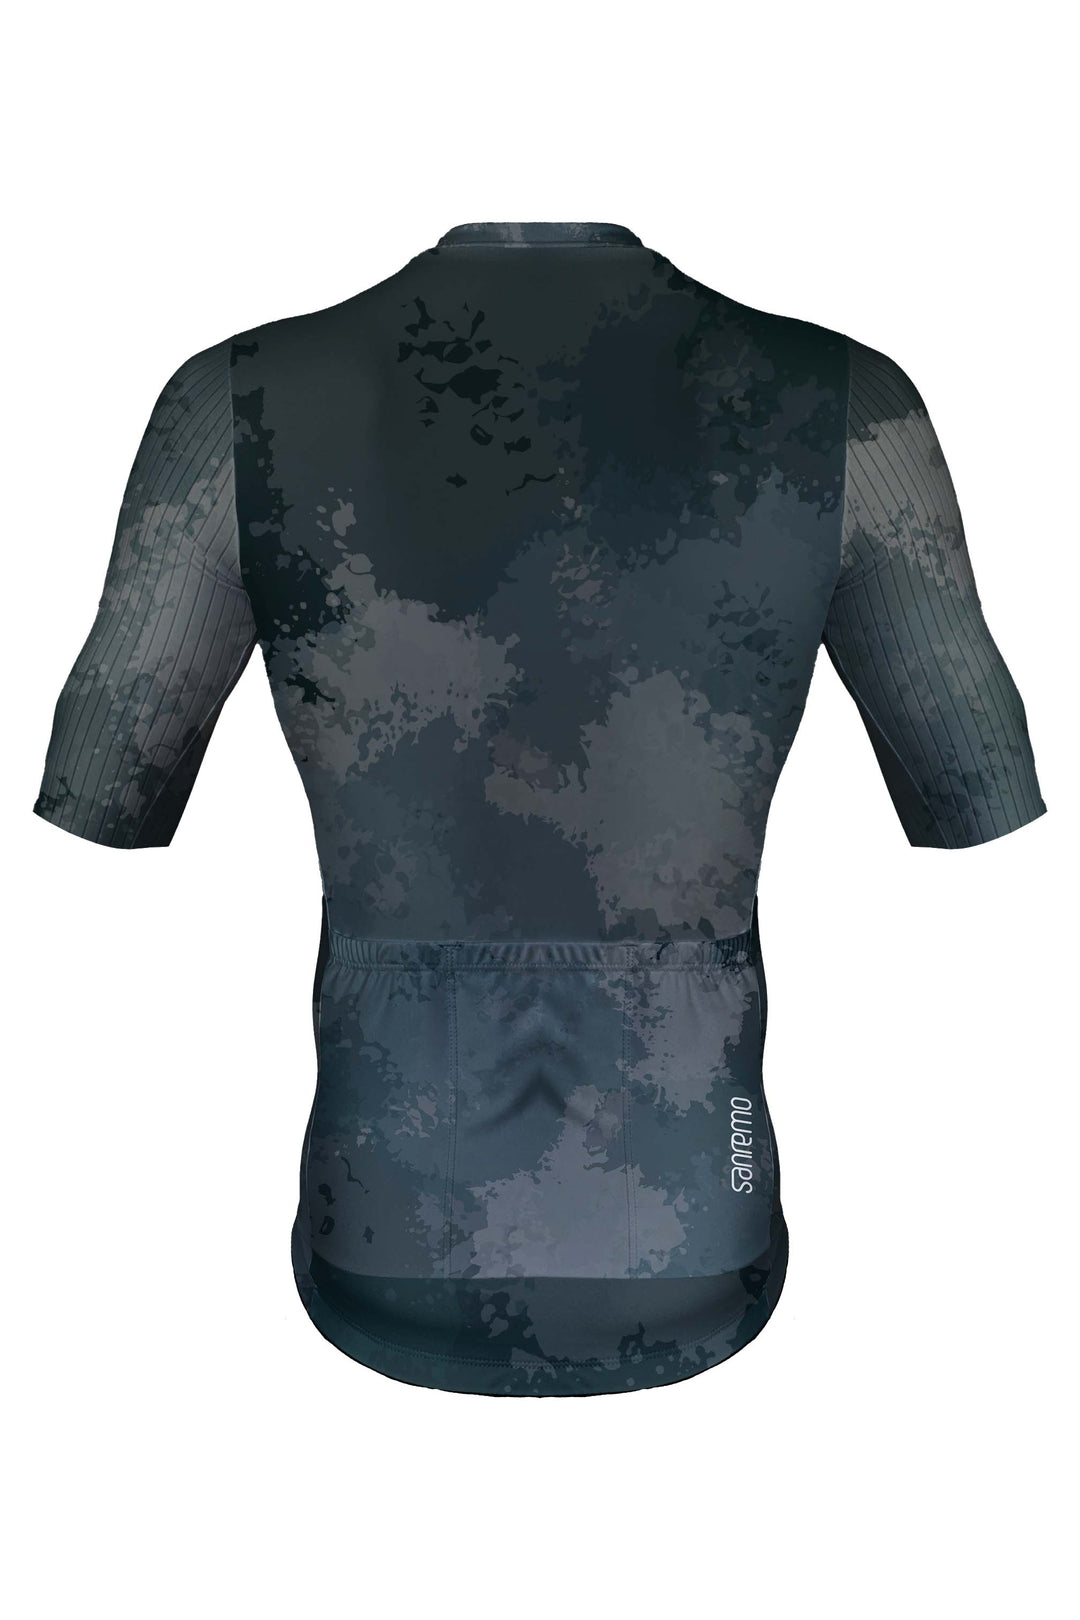 Jersey Corsa Forest- Hombre